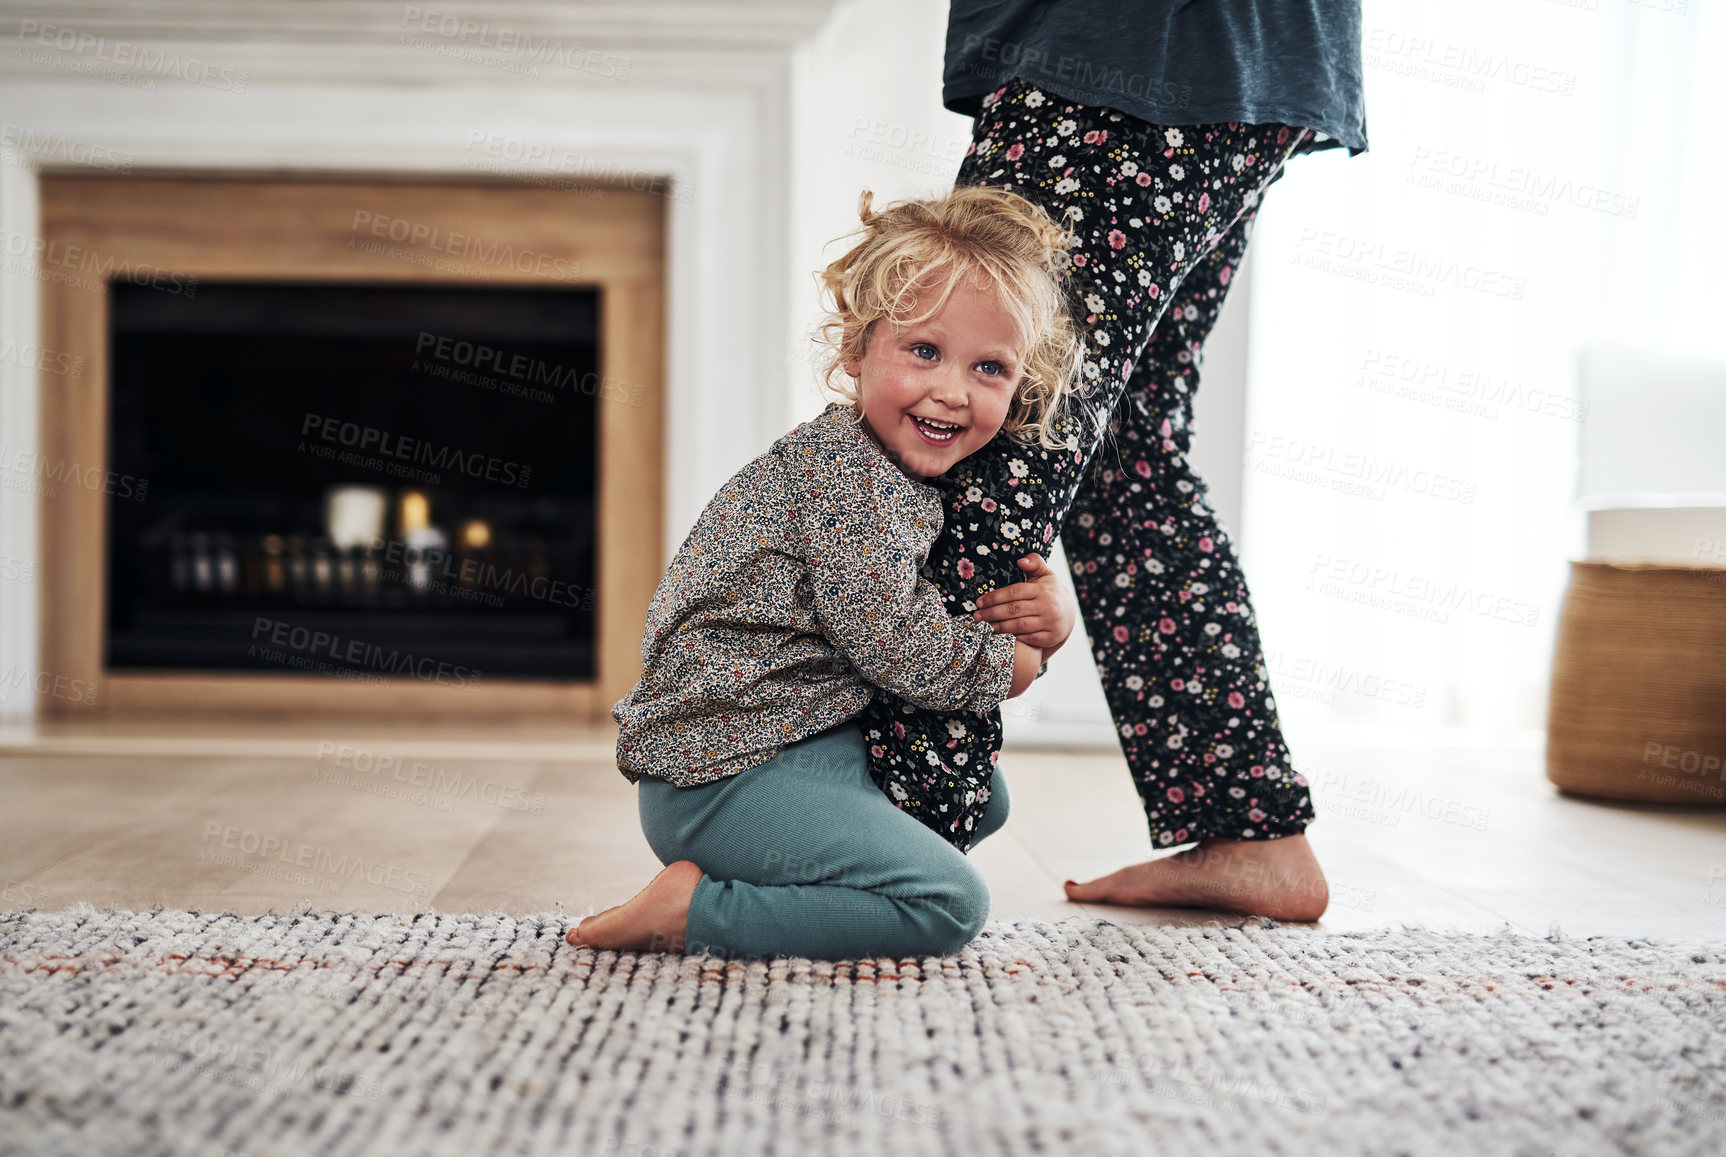 Buy stock photo Cropped shot of an adorable little girl bonding with her mother during a day at home